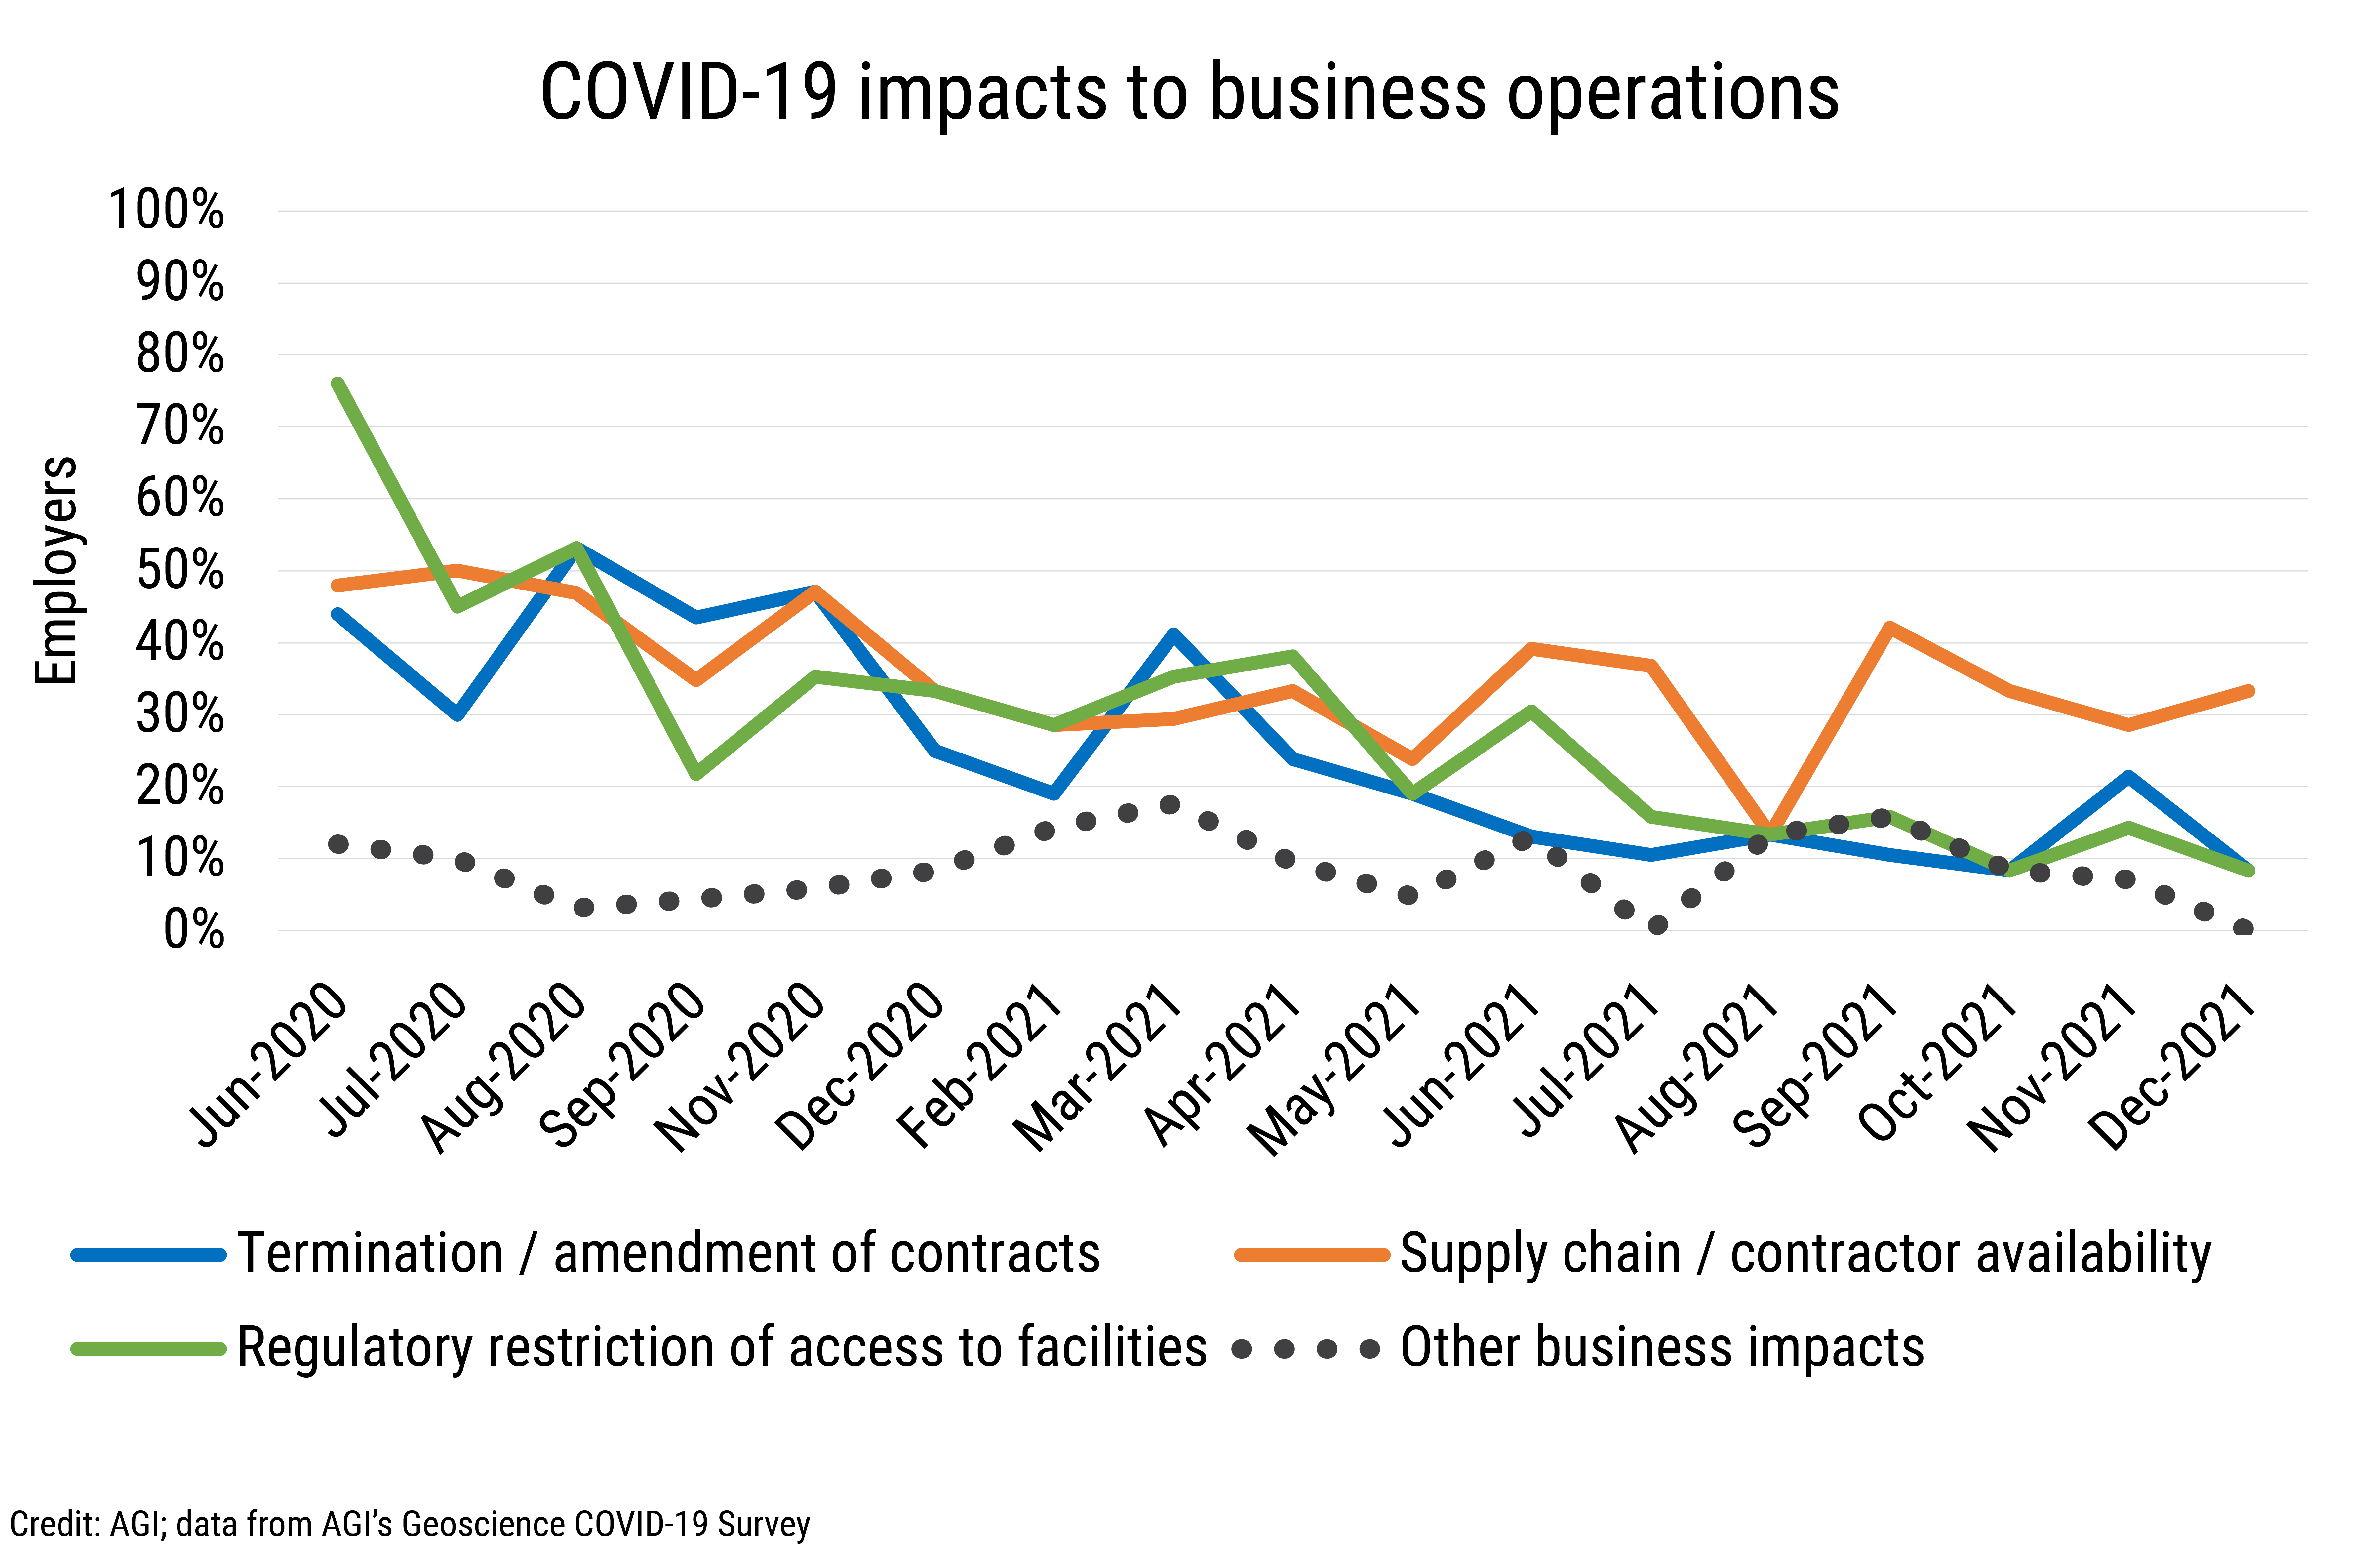 DB_2022-002 chart 06: COVID-19 impacts to business operations (Credit: AGI; data from AGI's Geoscience COVID-19 Survey)